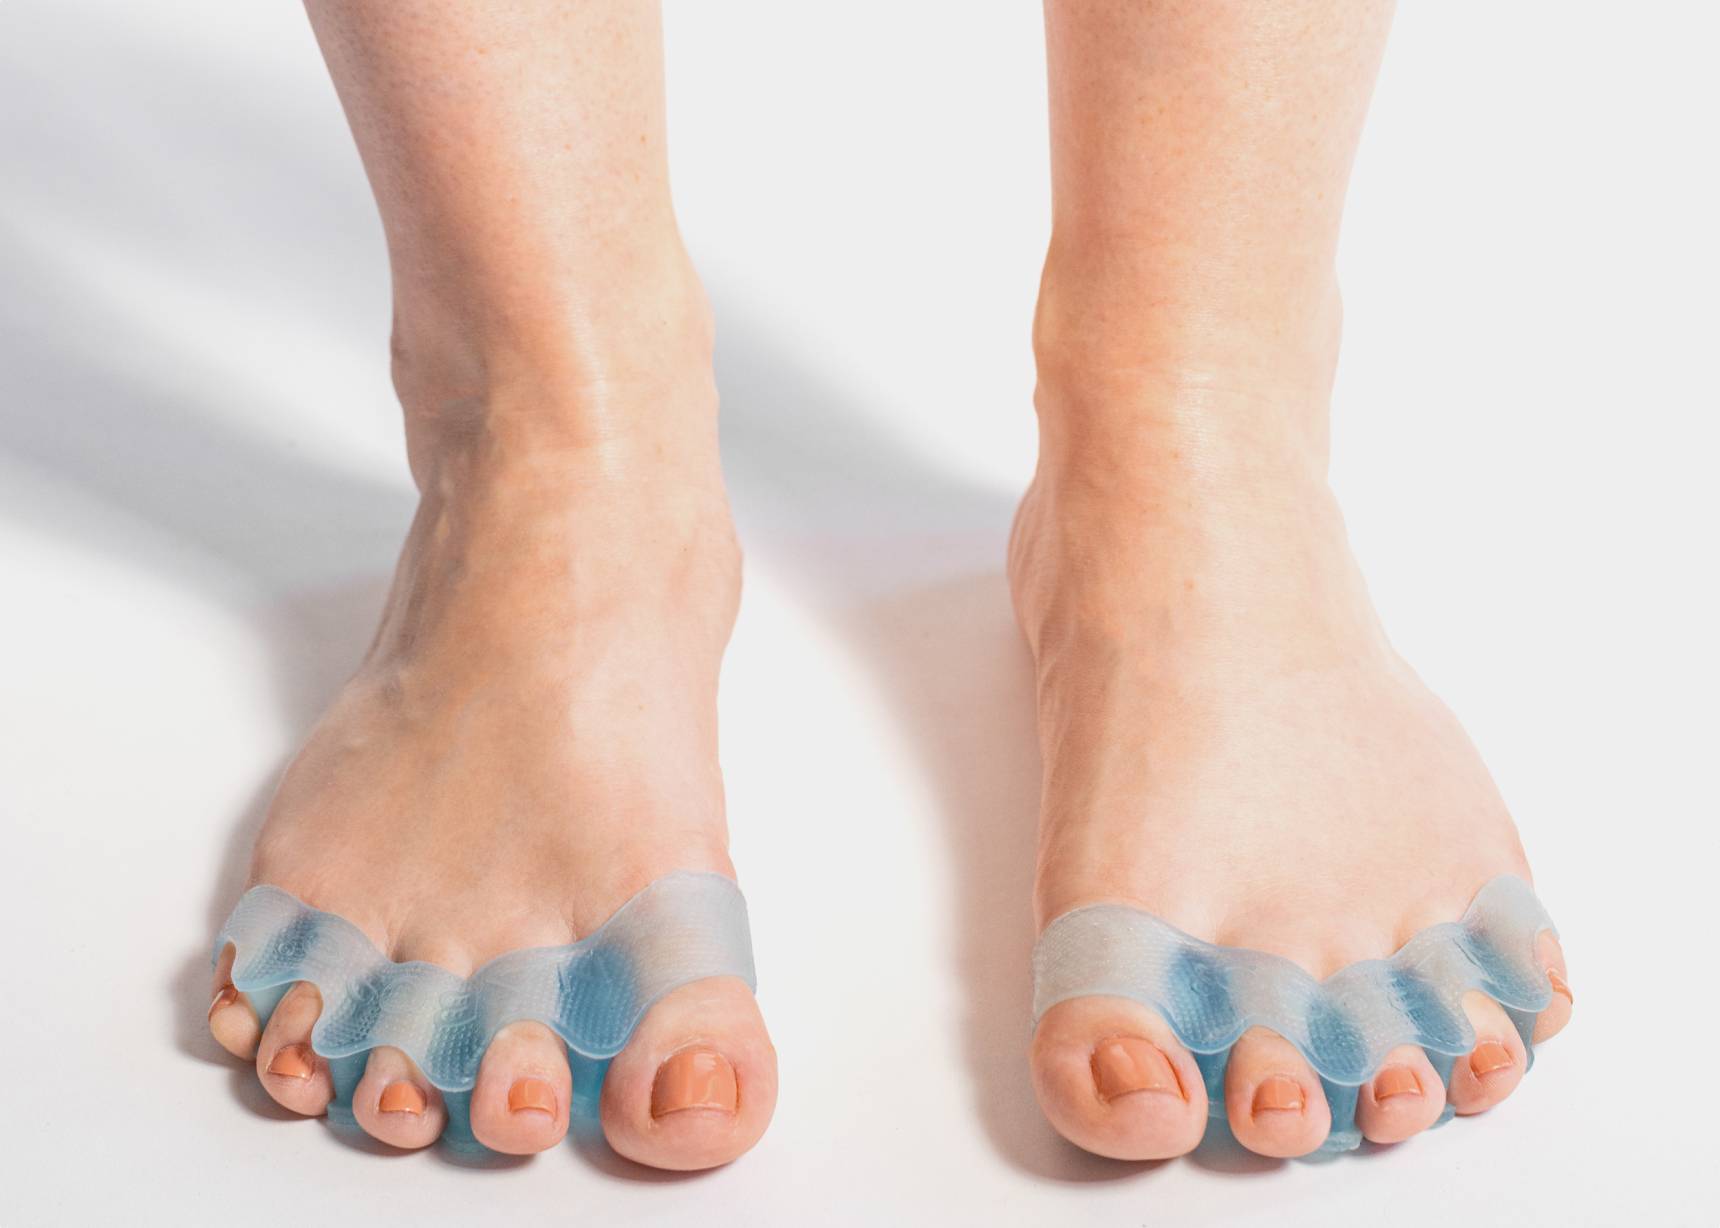 Close-up view of two legs with toes splayed, each featuring Naboso Splay technology for foot health.